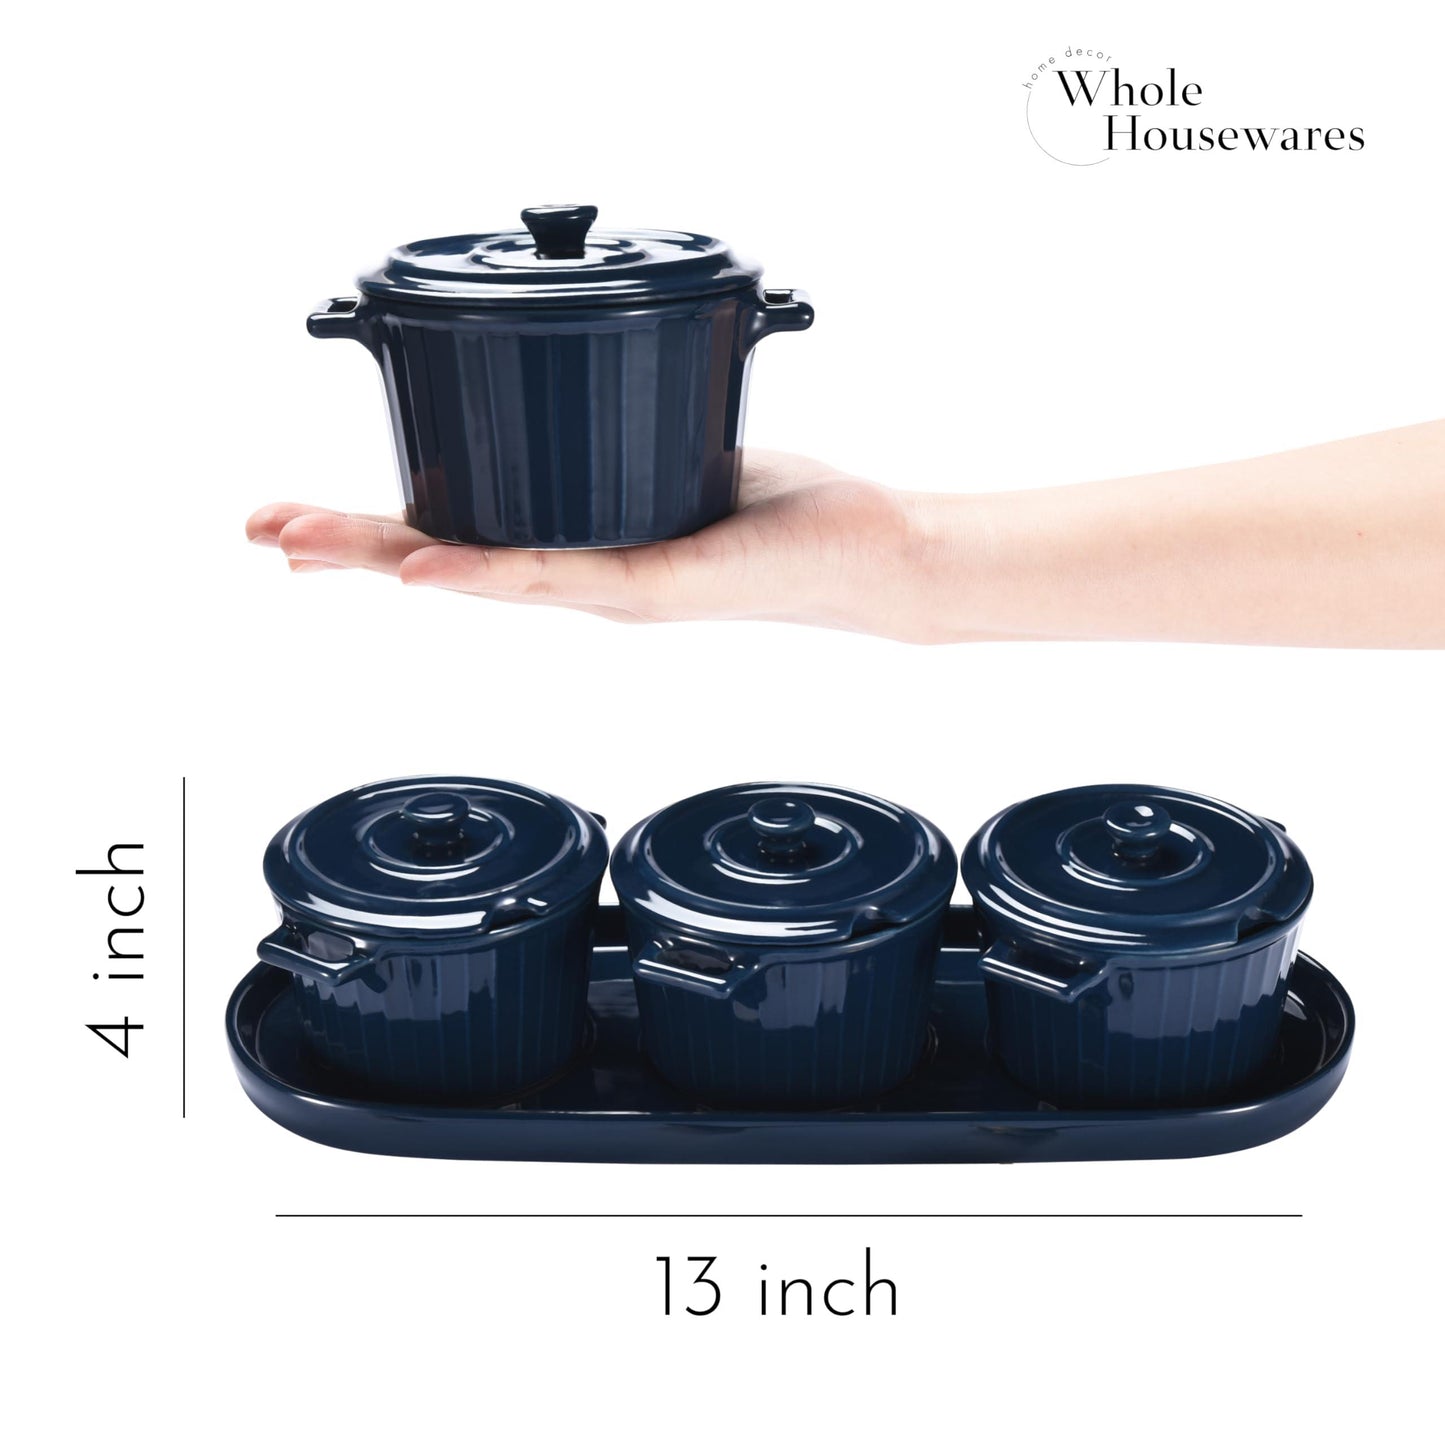 Whole Housewares Mini Cocotte Set with Golden Spoons and Blue Serving Tray - 3 Small Blue Casserole Dishes, 10oz Each with Lids and Handles - Versatile for Baking, Serving, Microwave & Dishwasher Safe - CookCave